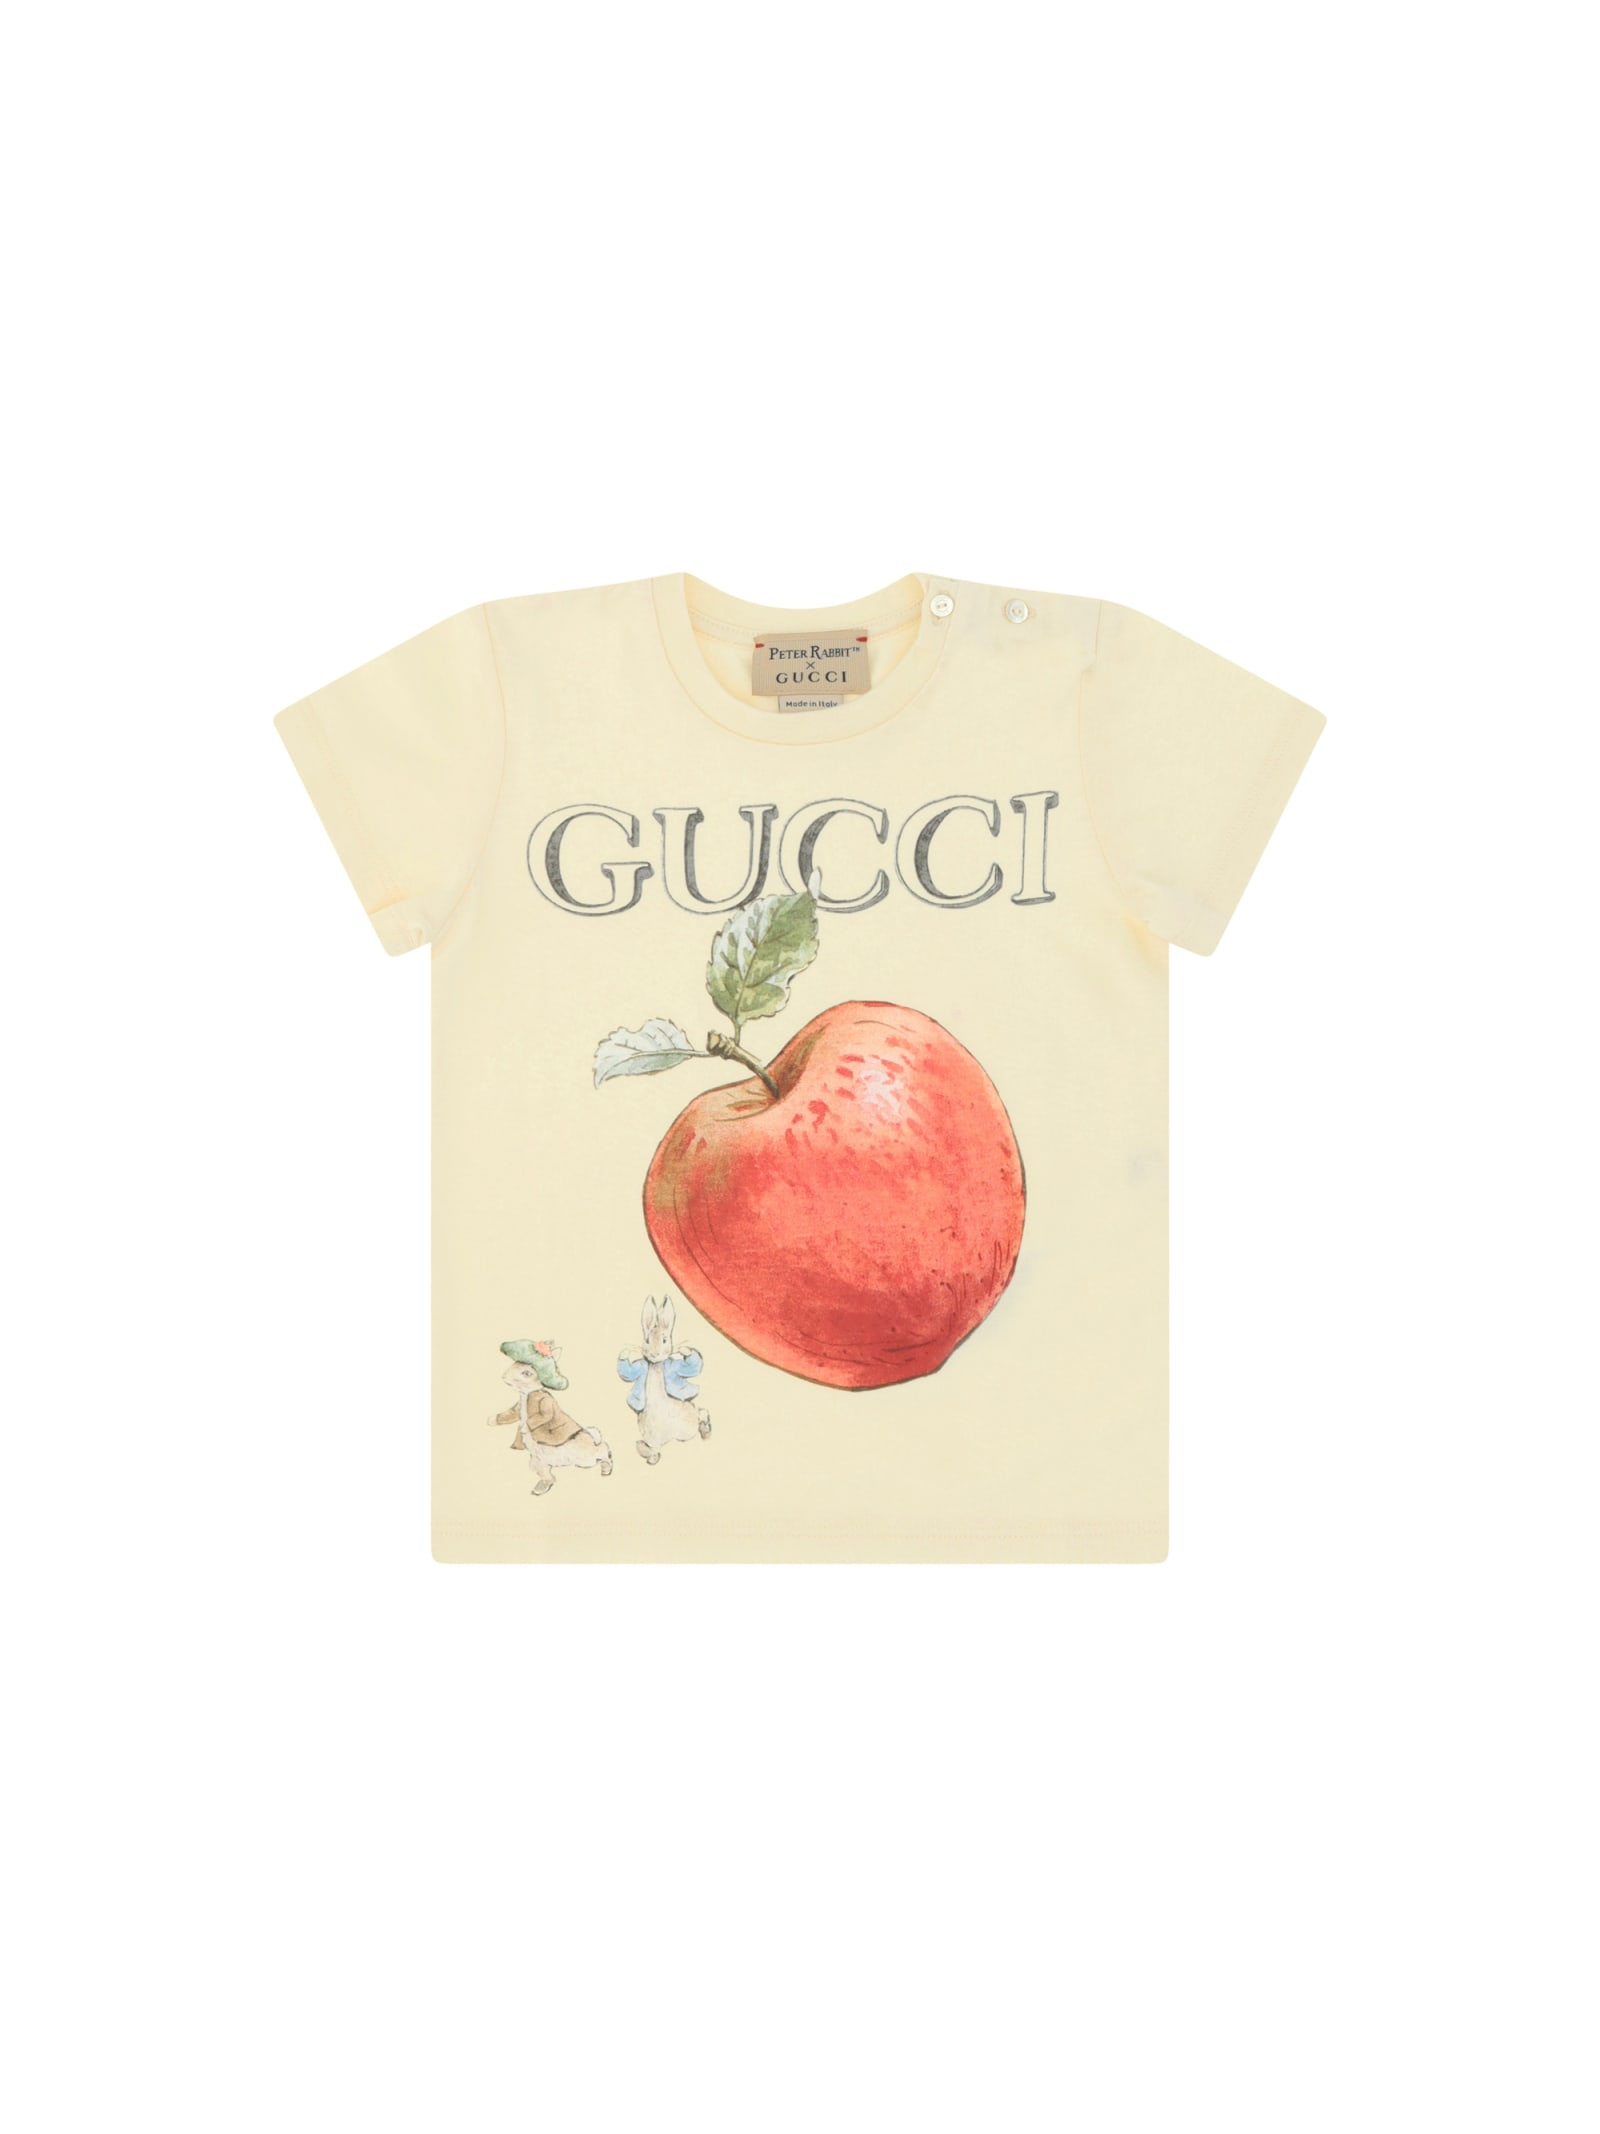 Gucci Kids' T-shirt For Boy In Sunkissed/red